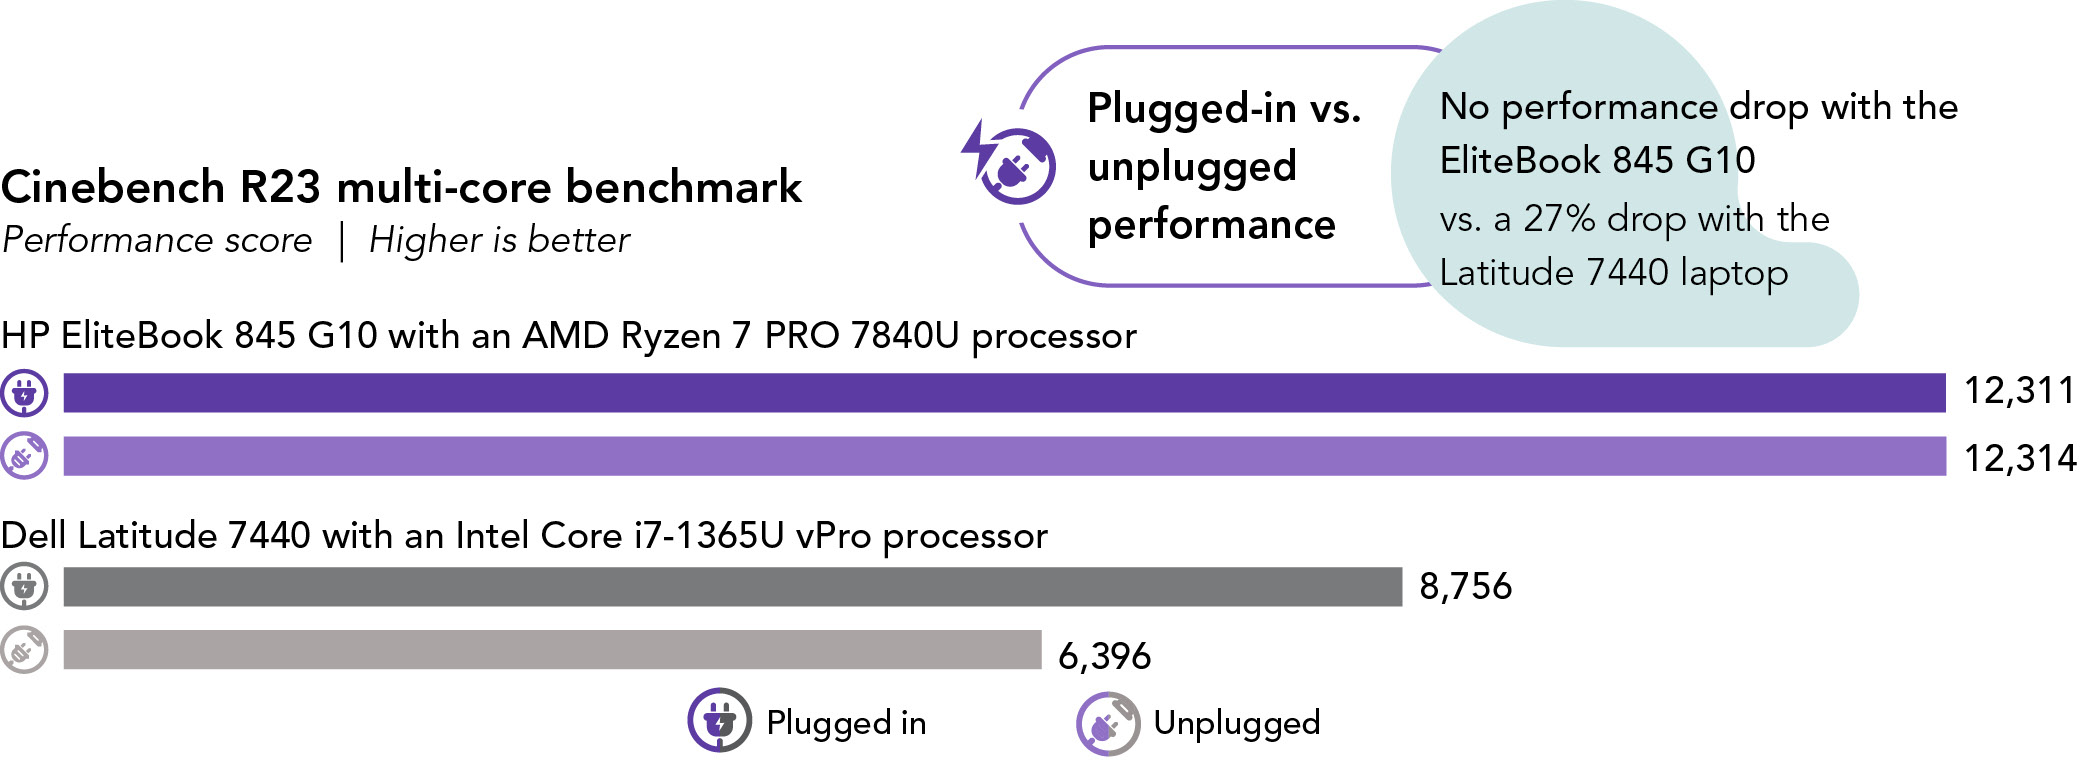 Chart showing Cinebench R23 multi-core benchmark performance scores. Higher is better. HP EliteBook 845 G10 shows a score of 12,311 plugged in and 12,314 unplugged. Dell Latitude 7440 shows a score of 8,756 plugged in and 6,396 unplugged. Plugged-in vs. unplugged performance: No performance drop with the EliteBook 845 G10 vs. a 27% drop with the Latitude 7440 laptop.